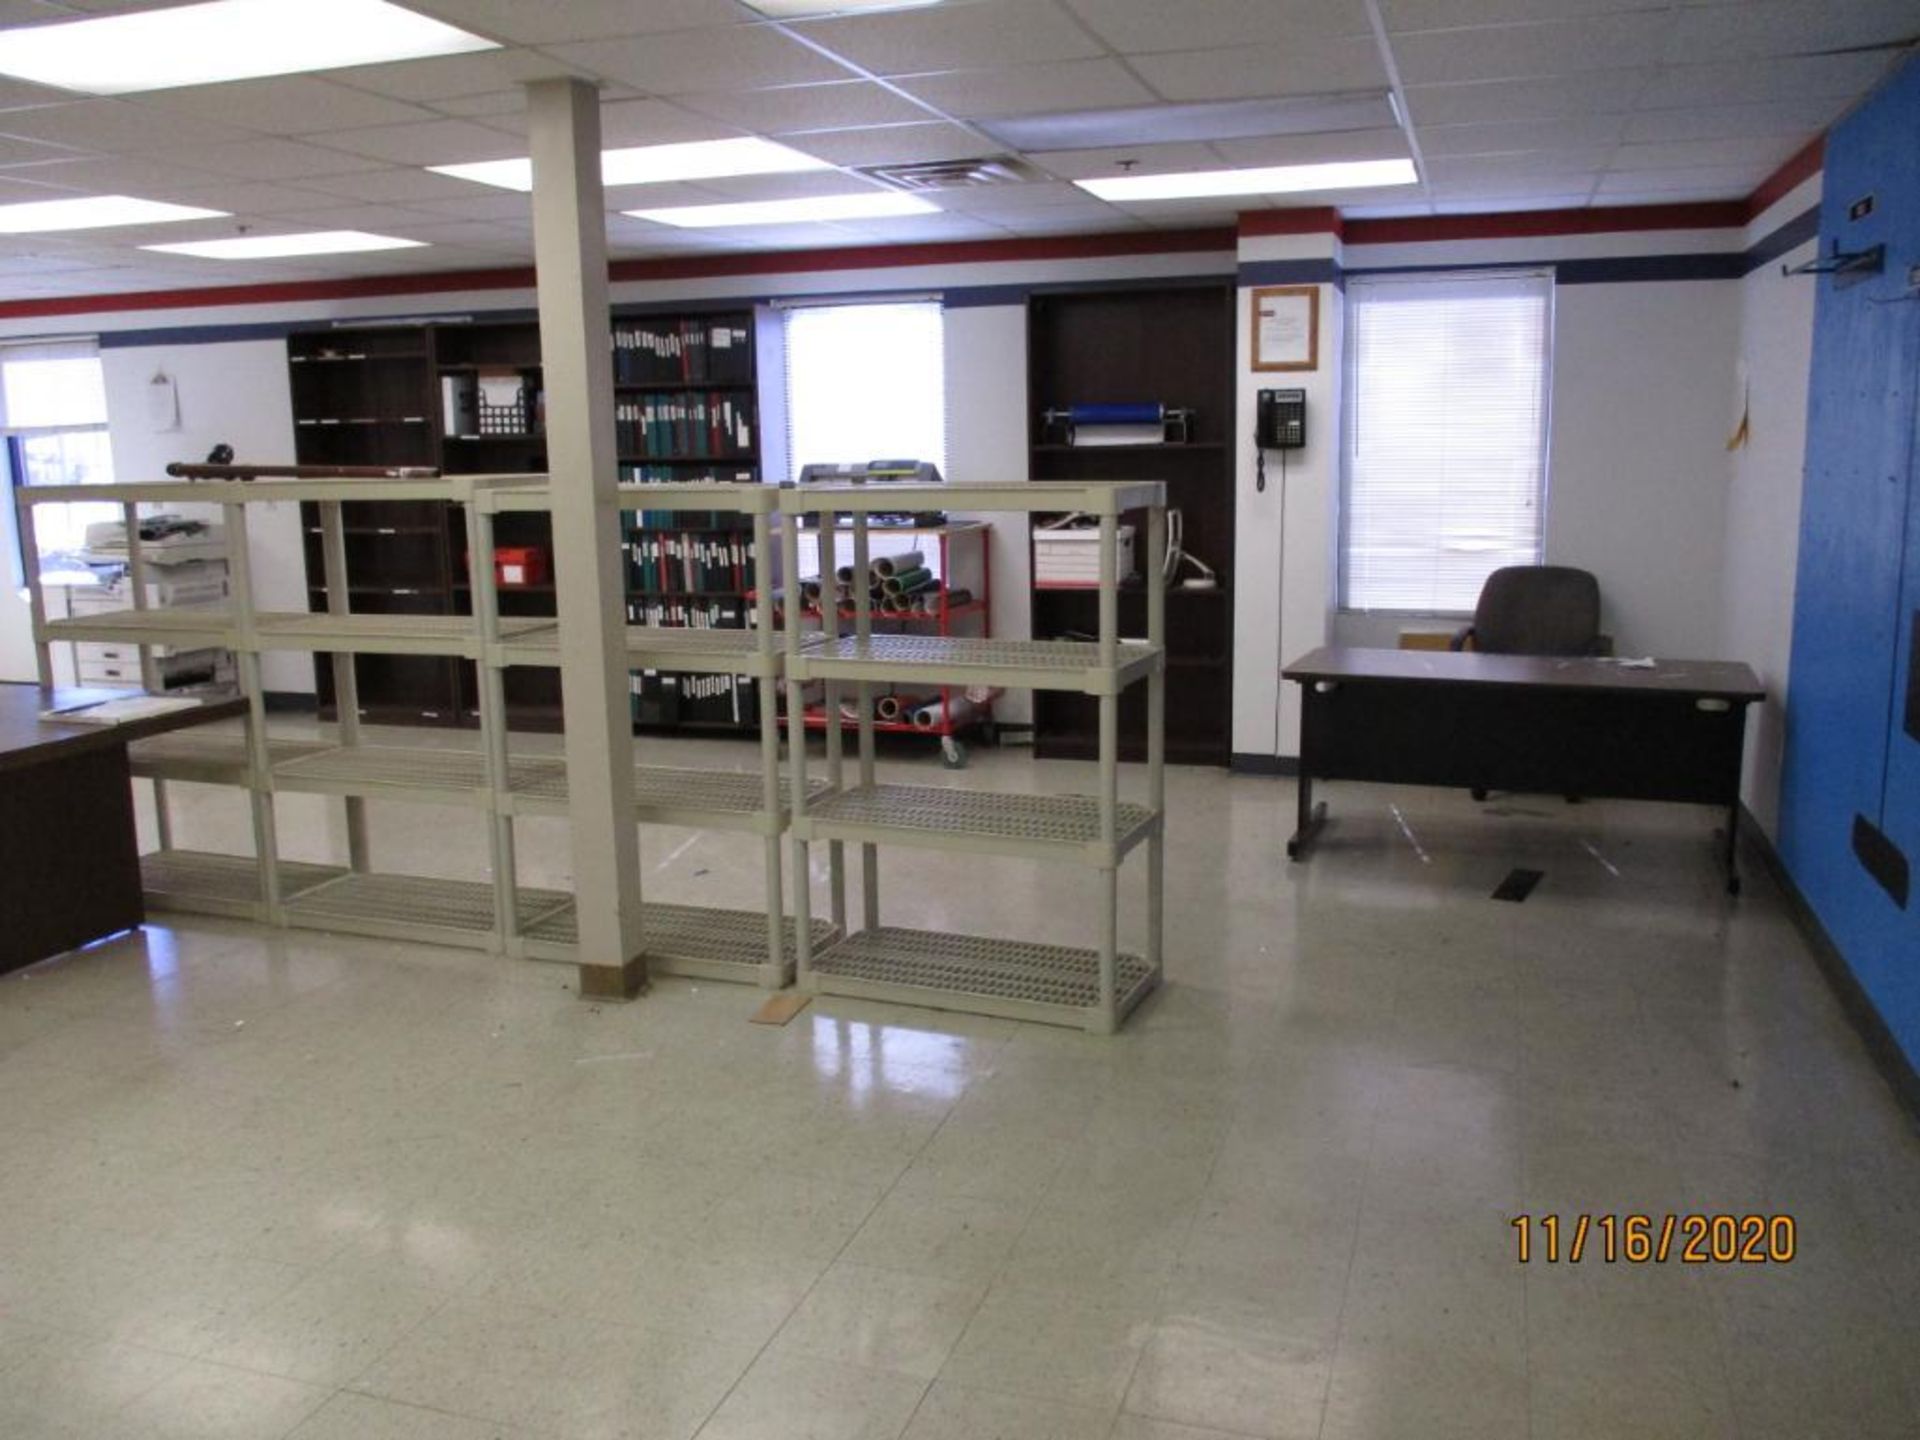 LOT: Contents of Quality Control Lab consisting of Desks, Book Shelves, Plastic Racks, etc. (LOCATED - Image 3 of 3